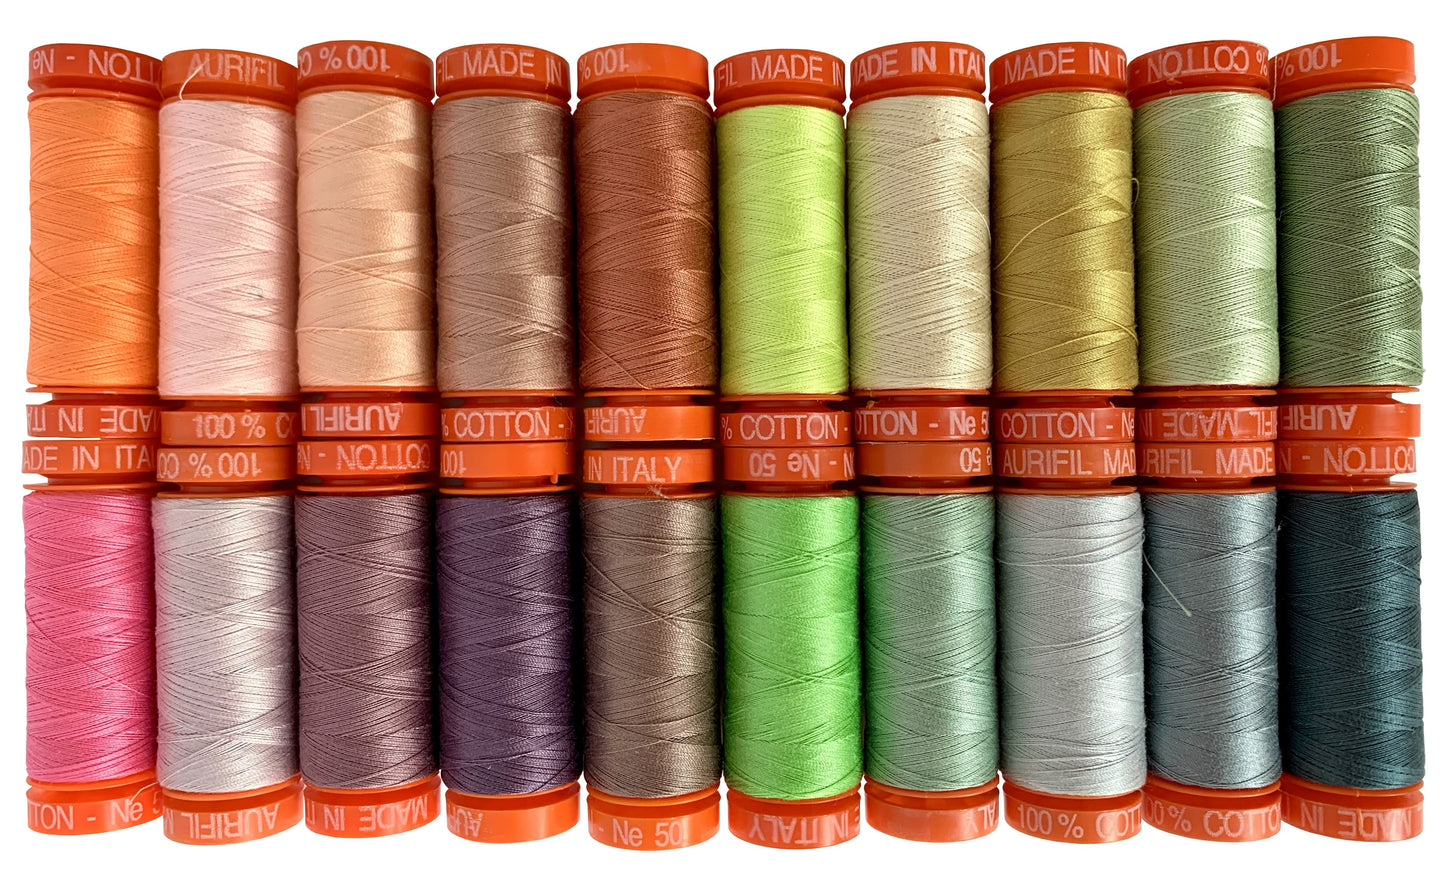 Neons and Neutrals 20 Small Spools - Aurifil Thread Collection | Tula Pink